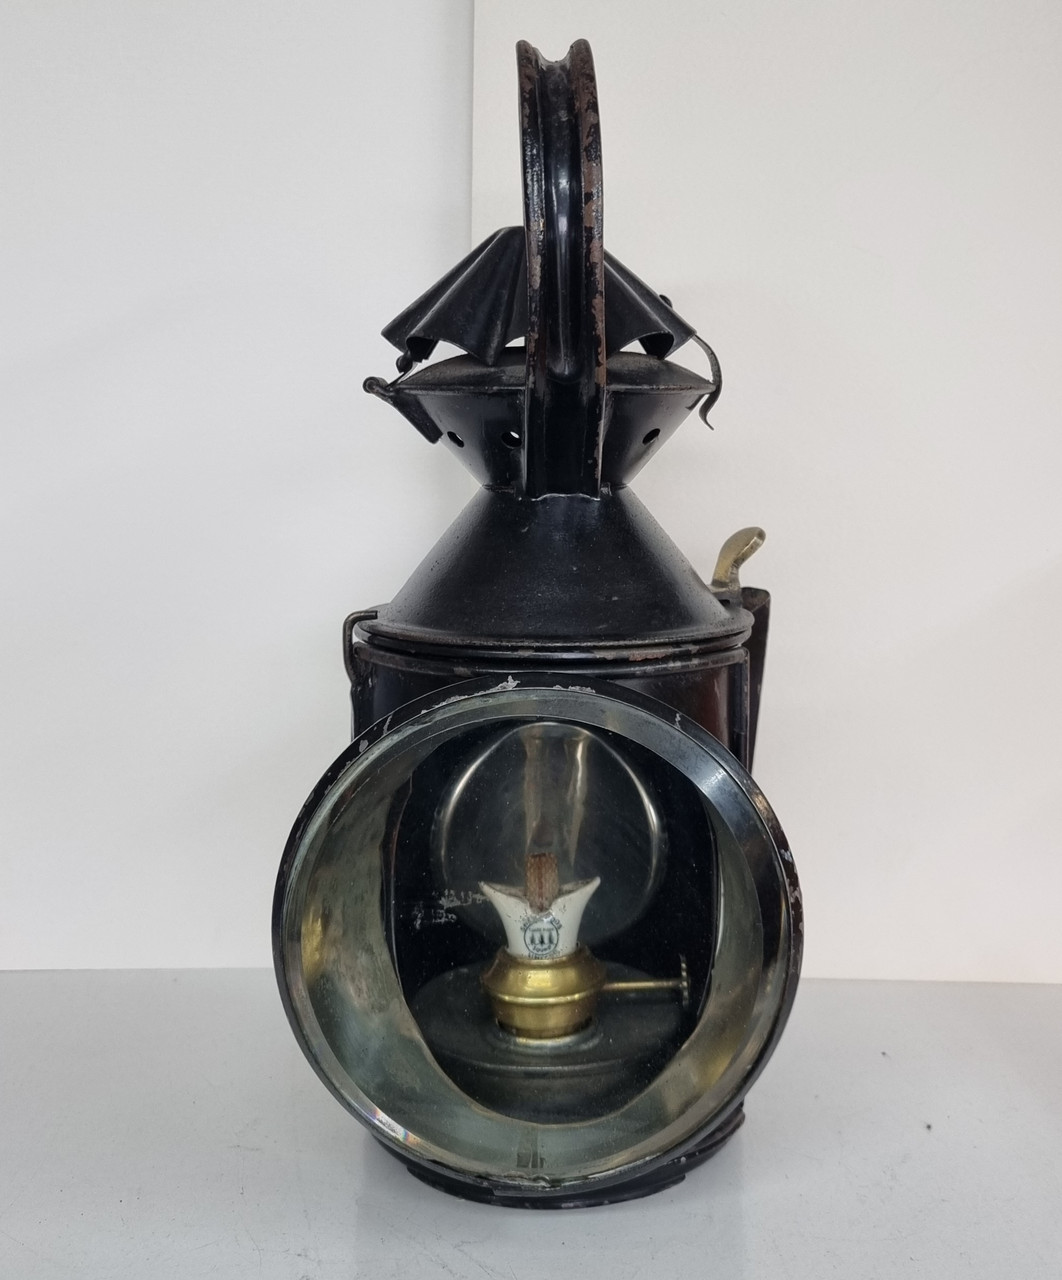 VT 5781  L.N.E.R. 3 ASPECT HAND LAMP BRASS PLATED "PUDSEY  GREENSIDE" FROM LEEDS